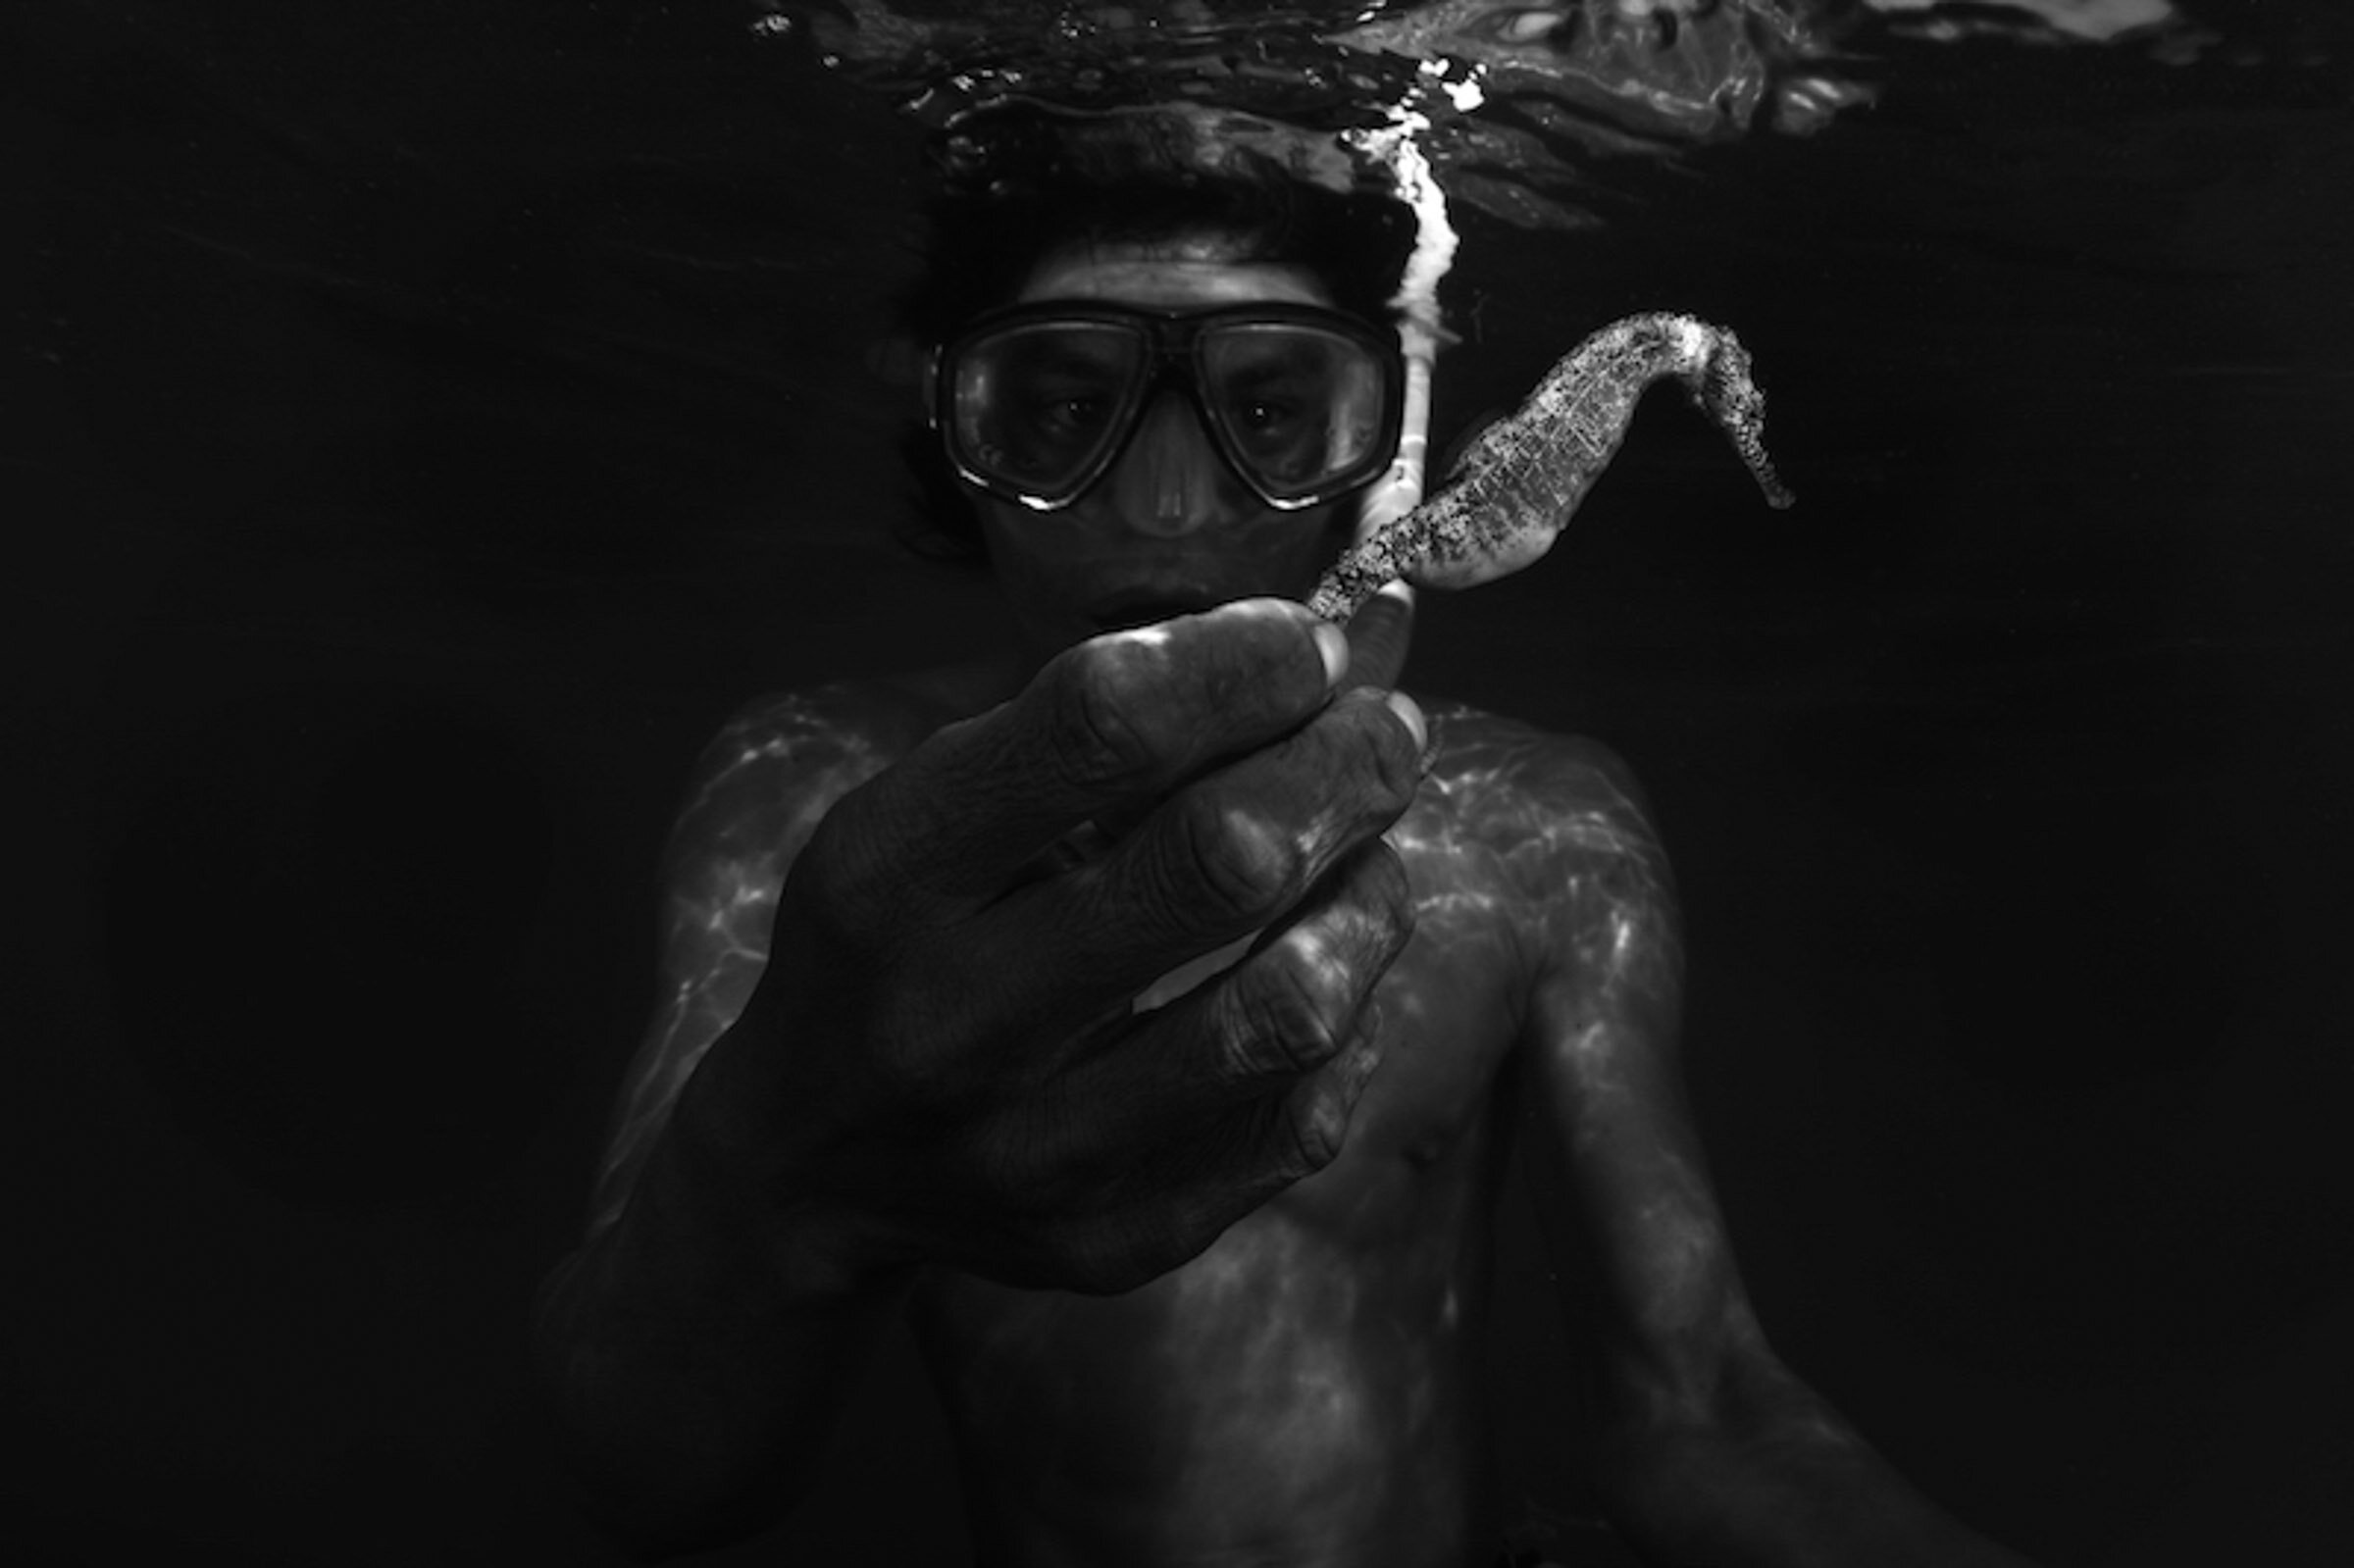 The Bajau tribe target seahorses which will be ground up and sold in tea, as they are believed to have medicinal qualities. As a result of the trade, around 50 million seahorses are killed every year, pushing many species to the brink of extinction.